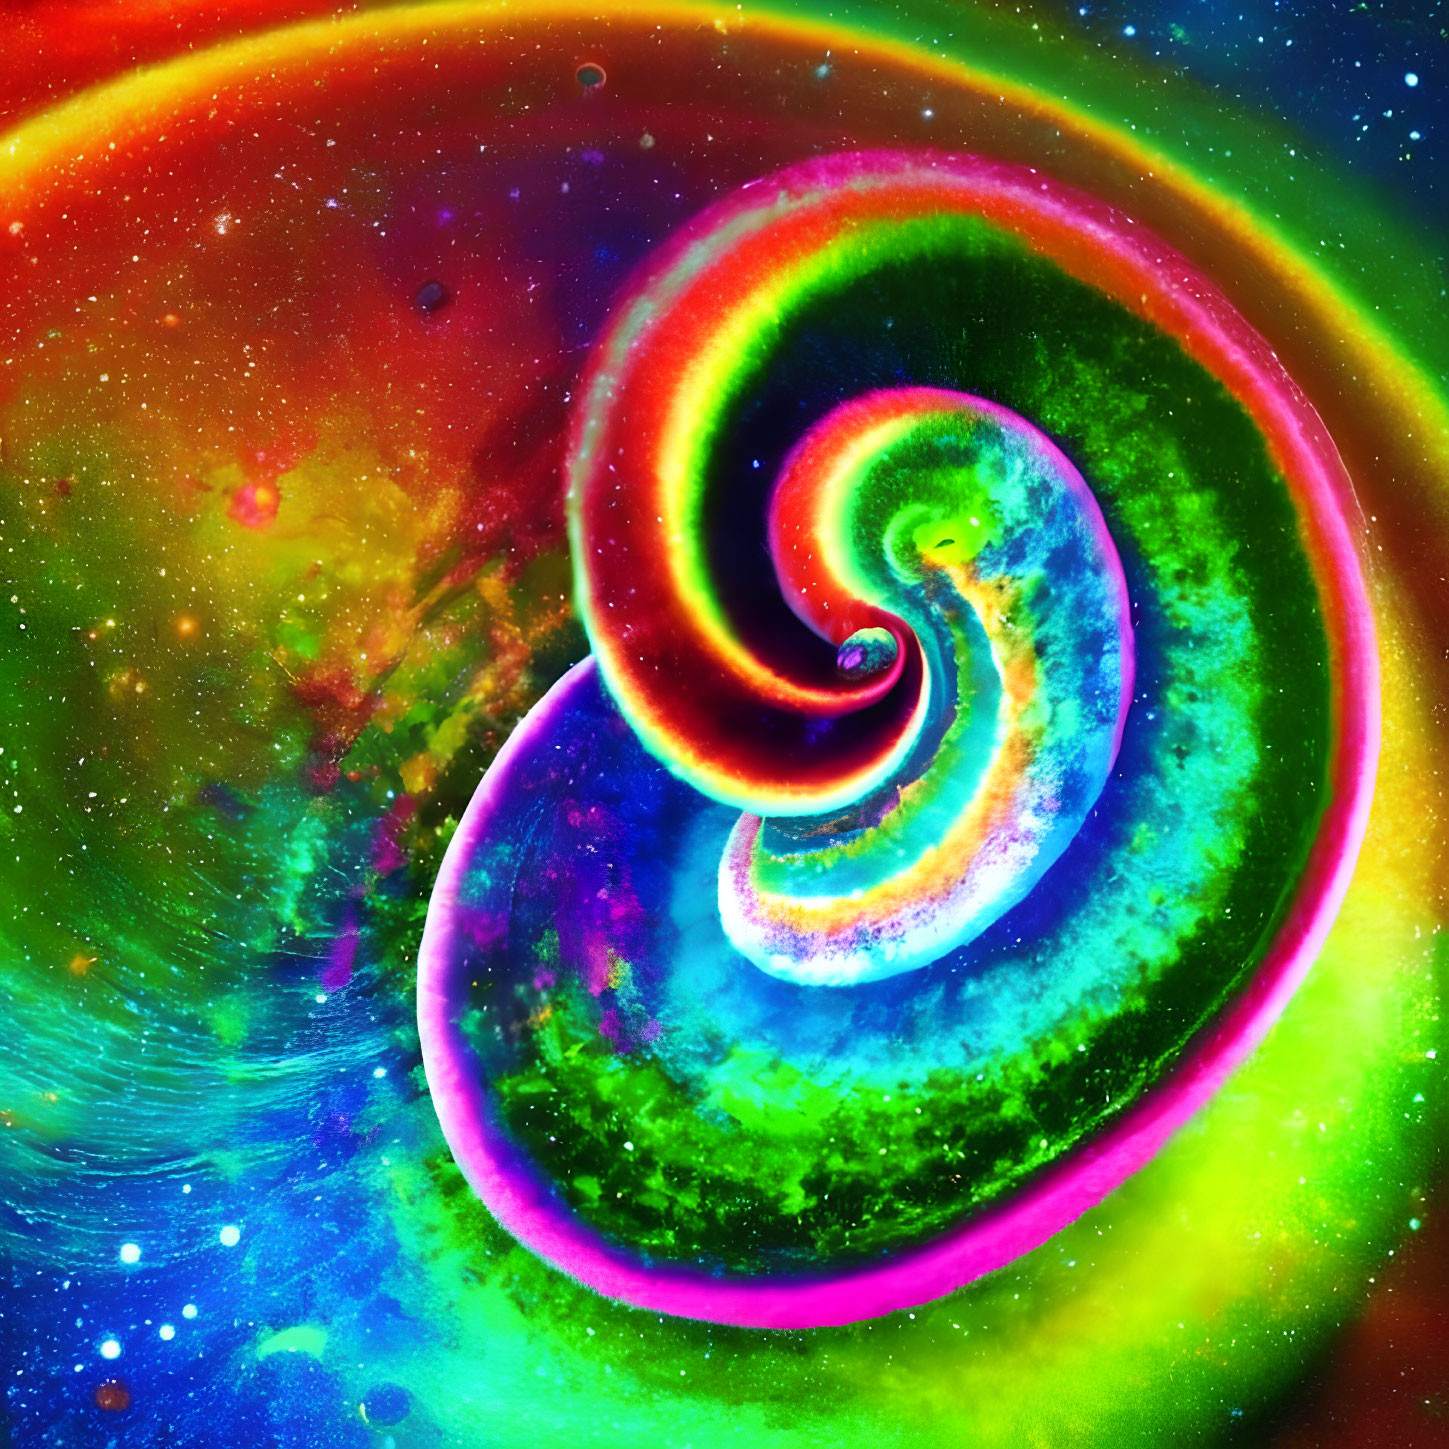 Colorful Abstract Swirl Resembling Galaxy in Red, Green, Blue, Yellow